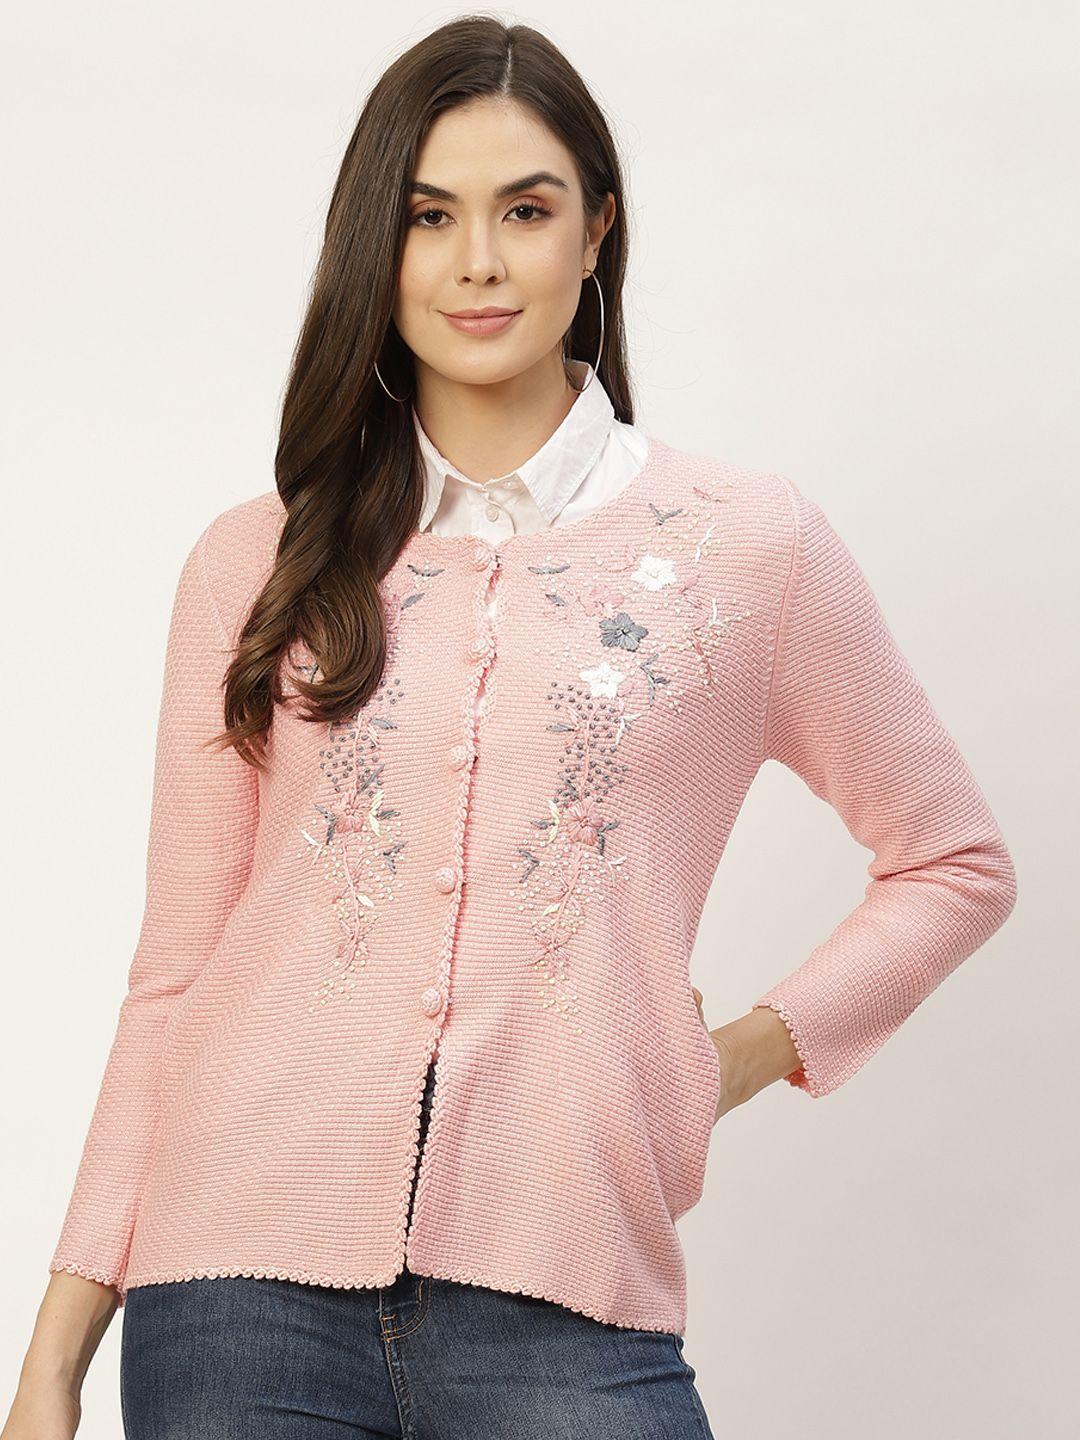 apsley-women-pink-&-white-floral-embroidered-cardigan-with-embellished-detail